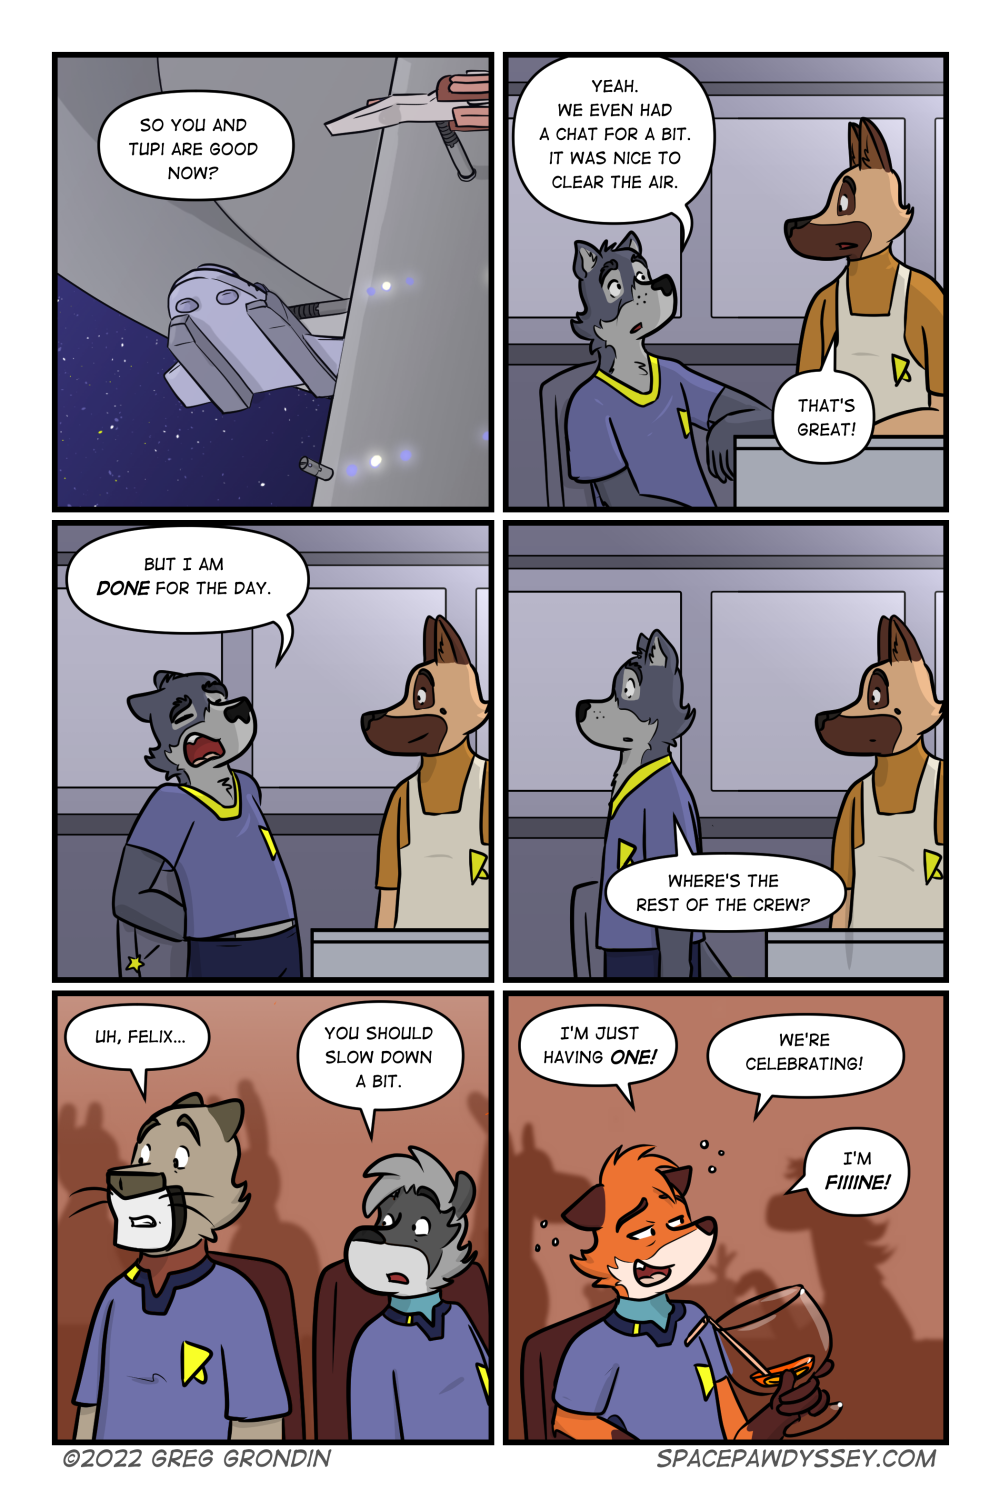 Space Pawdyssey #569